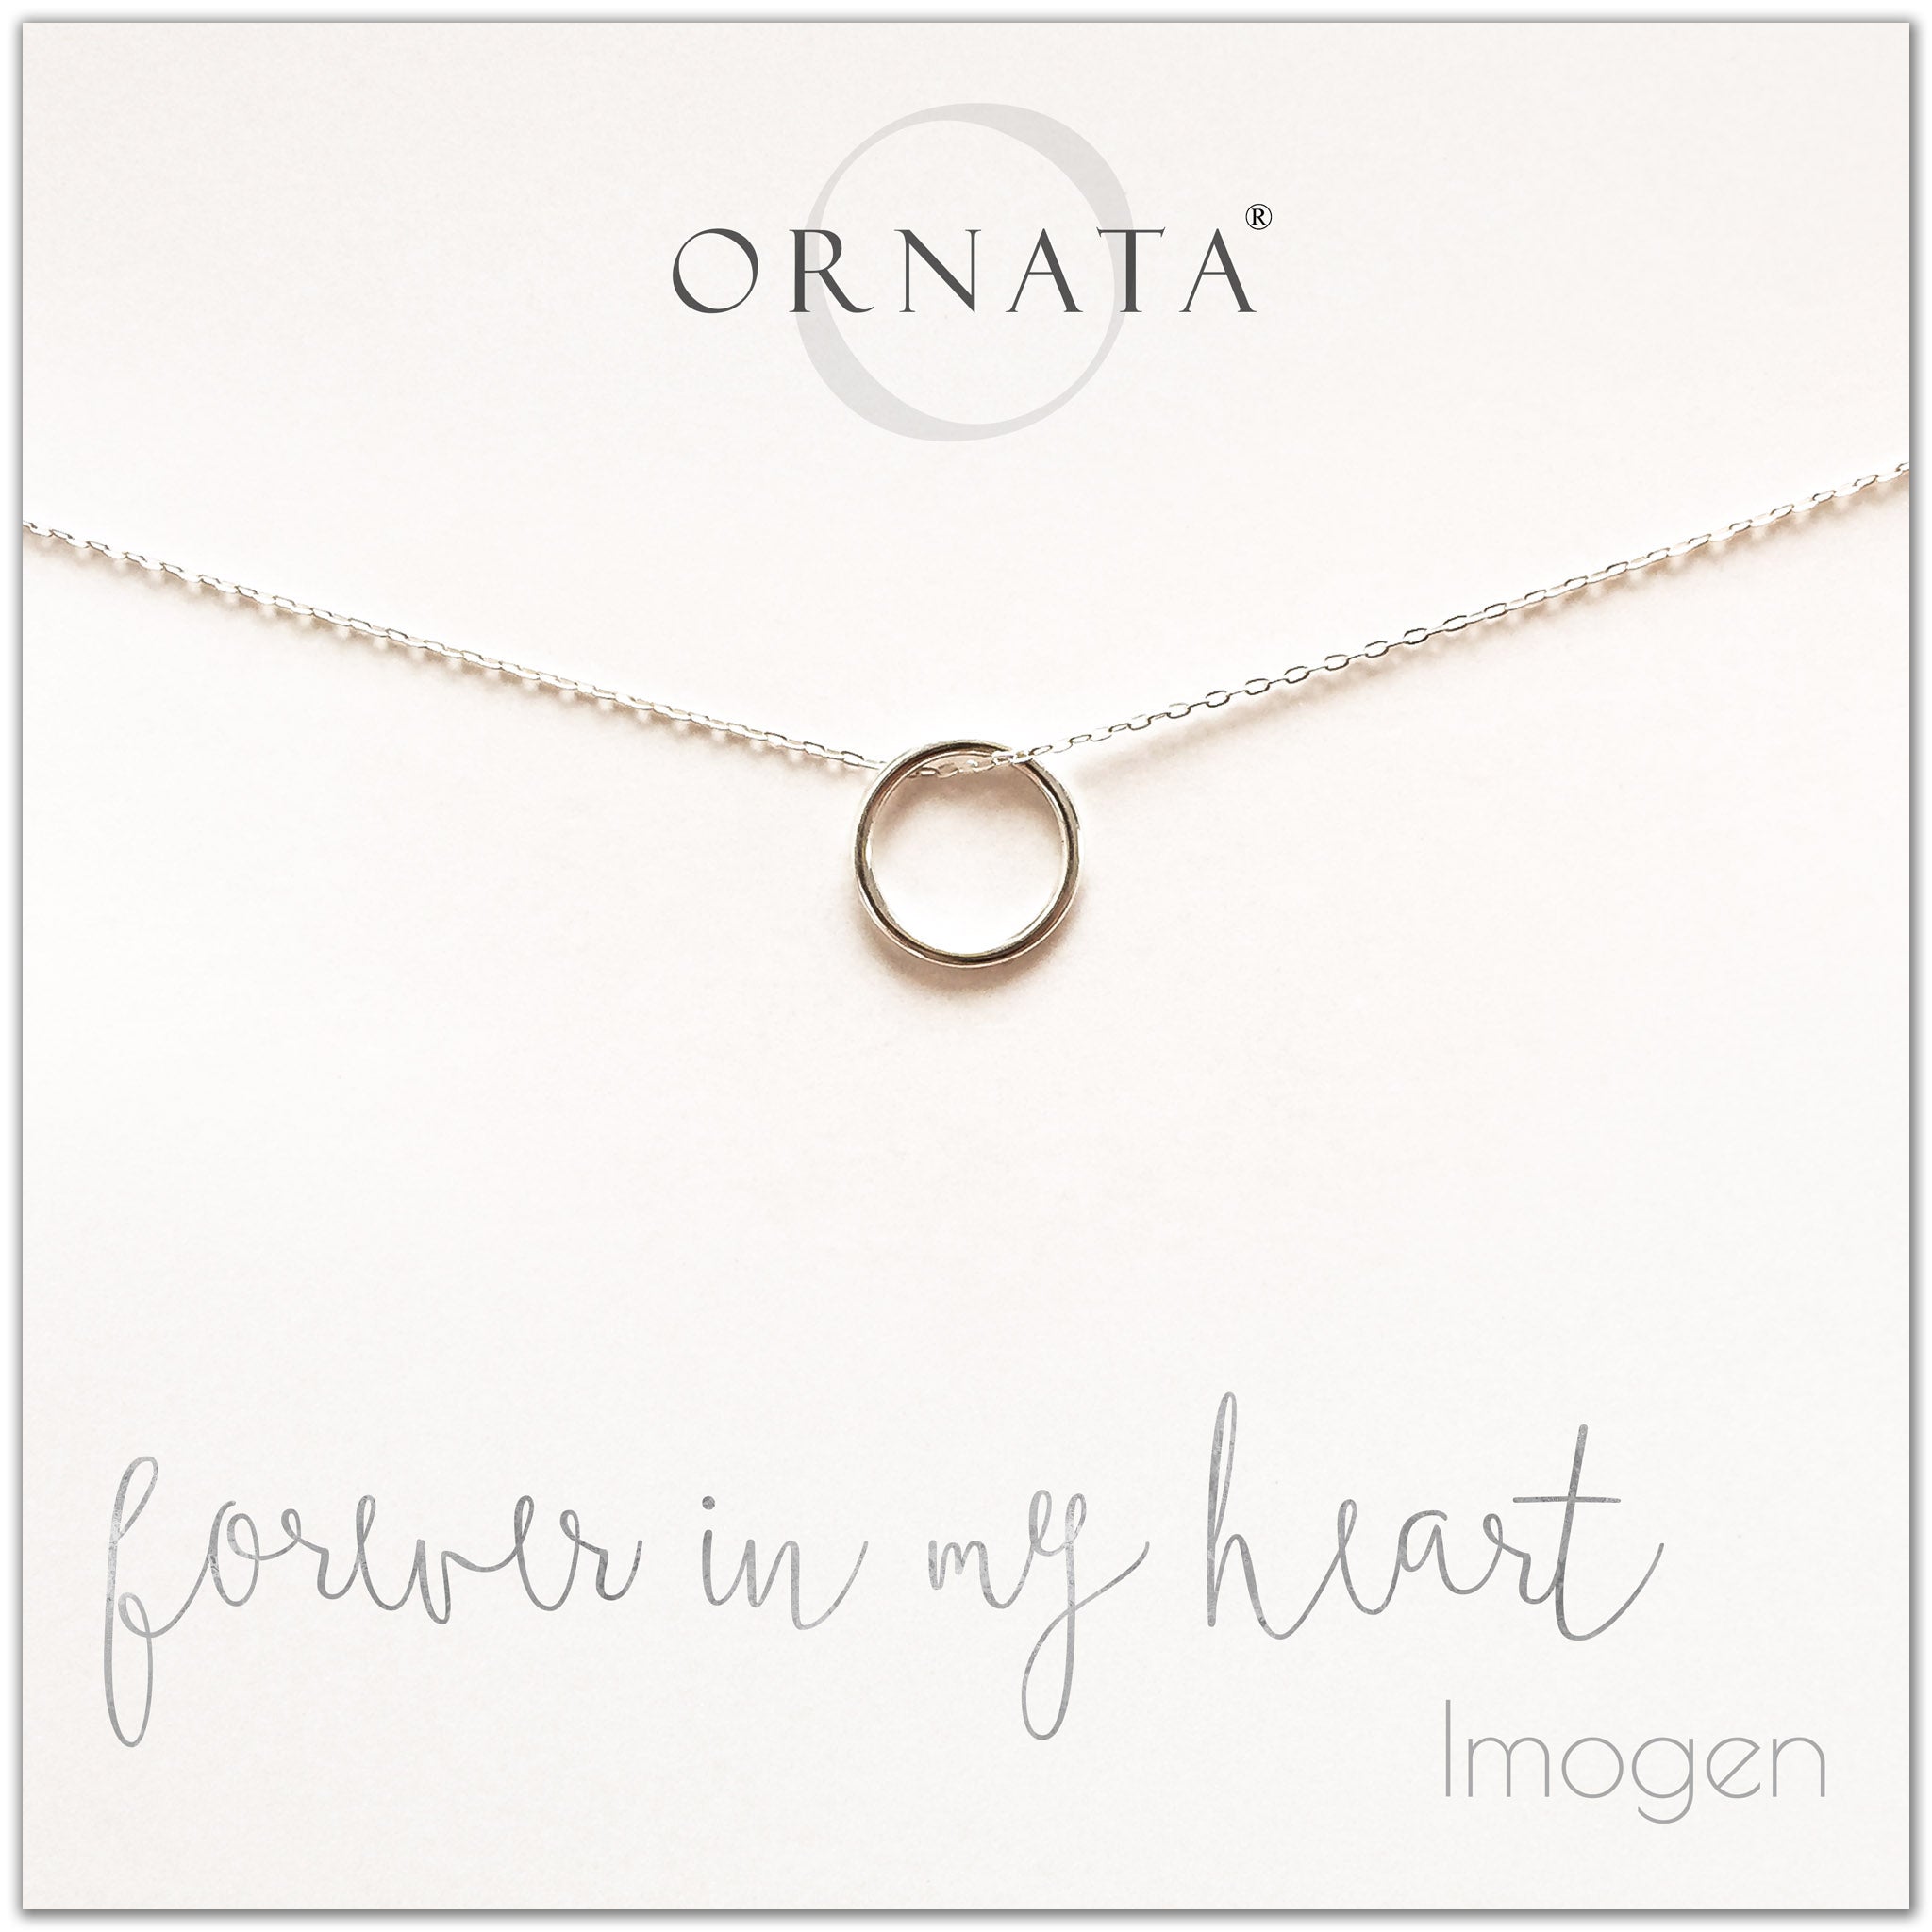 Forever in my heart necklace - personalized silver ring necklace. Our sterling silver custom jewelry is a perfect gift for girlfriends, wives, mothers, nieces, daughters, best friends, sisters, significant others, and soul mates - symbolic circle necklace to show your love. 